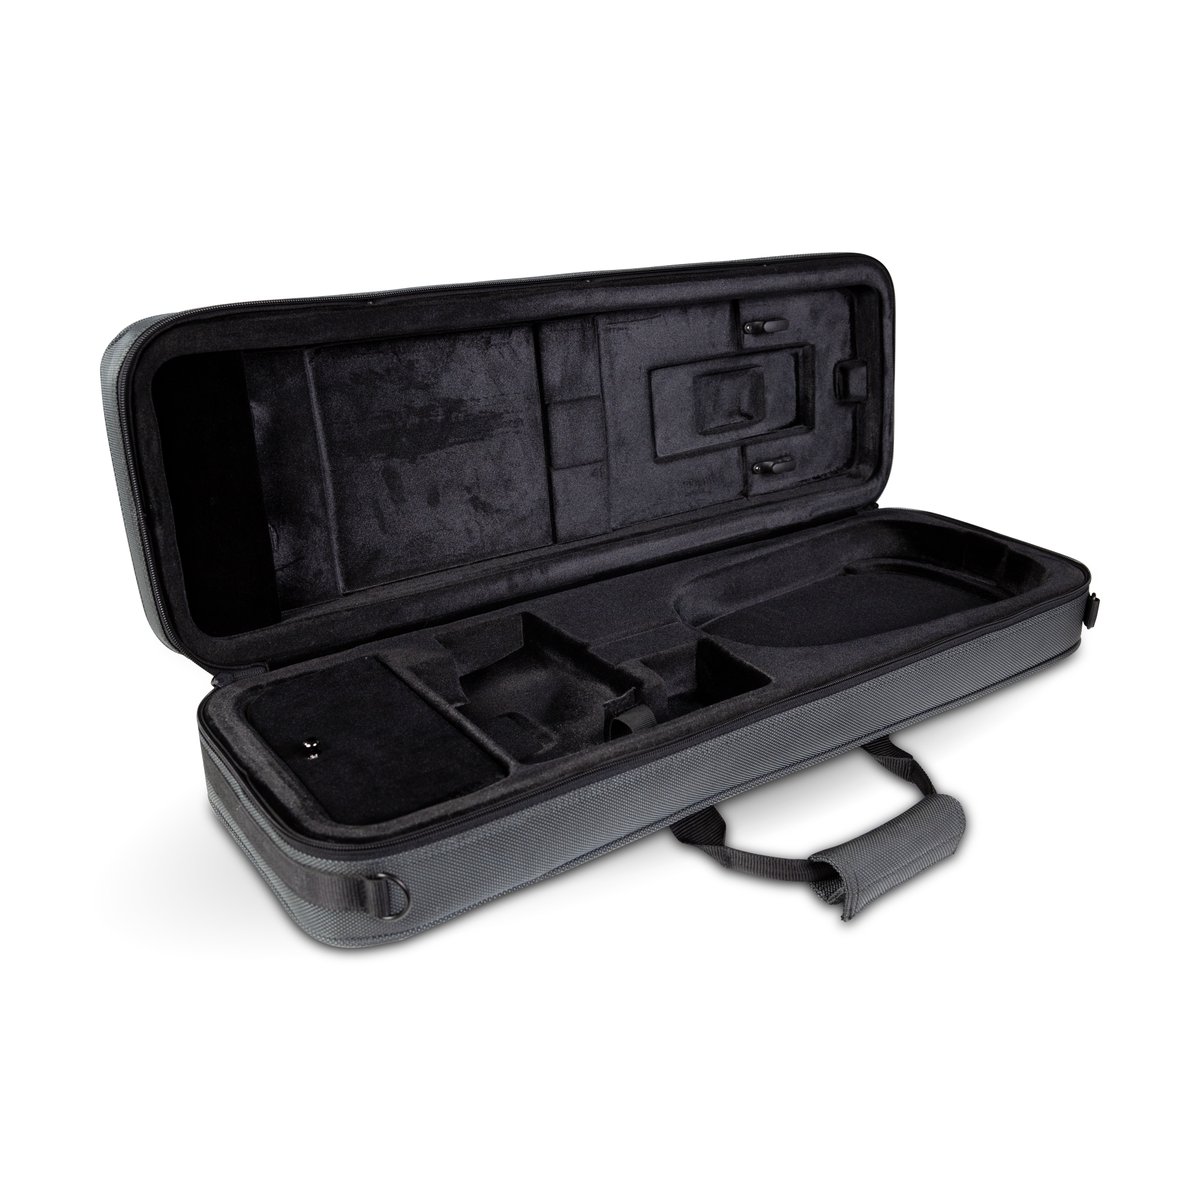 Lightweight Case for 3/4 sized Violin